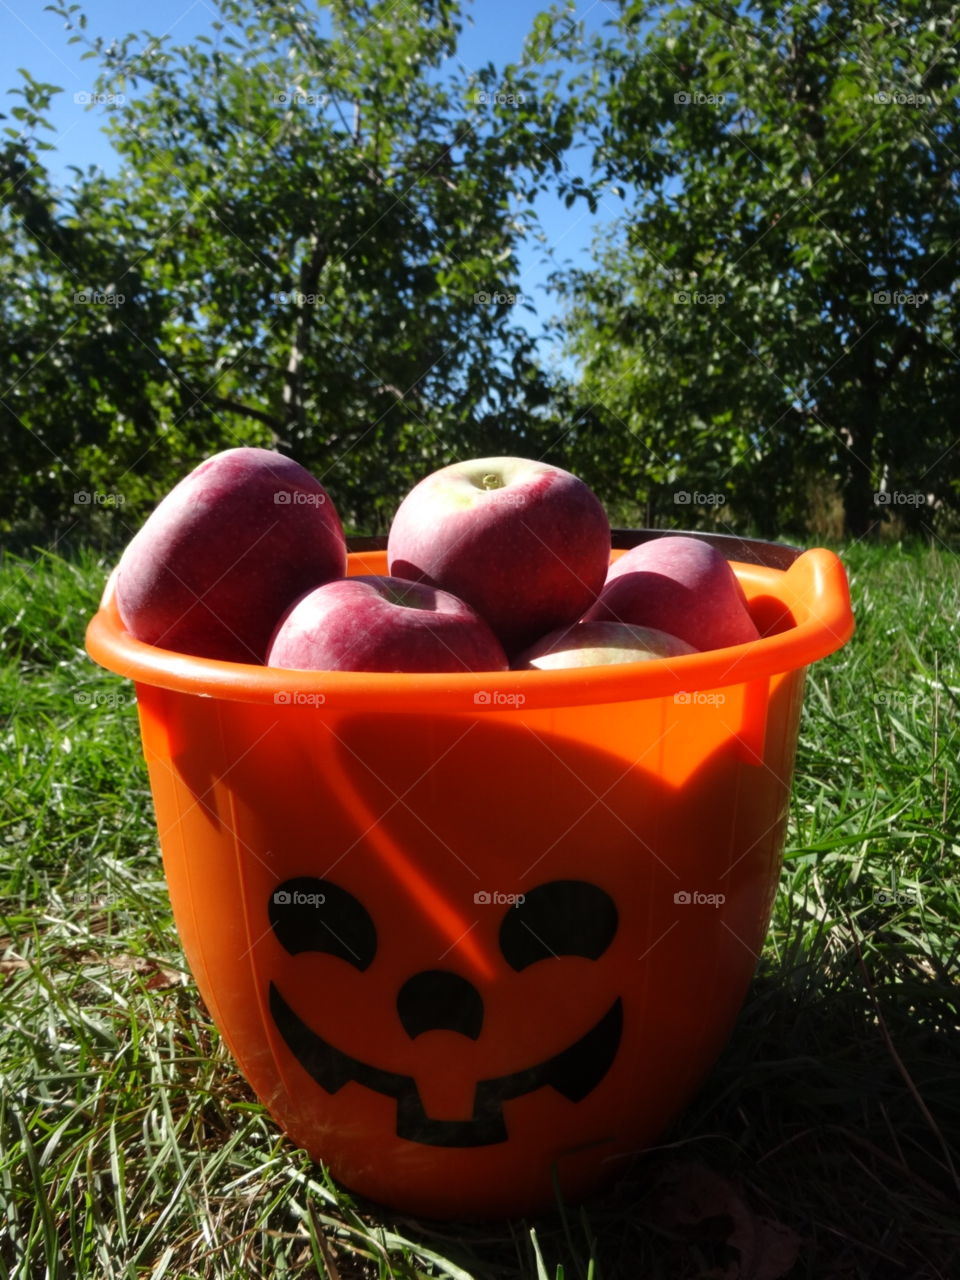 A pumpkin bucket filled to the brim with delicious apples picked from Mack’s Apples farm in Londonderry, New Hampshire on a sunny, fall day!